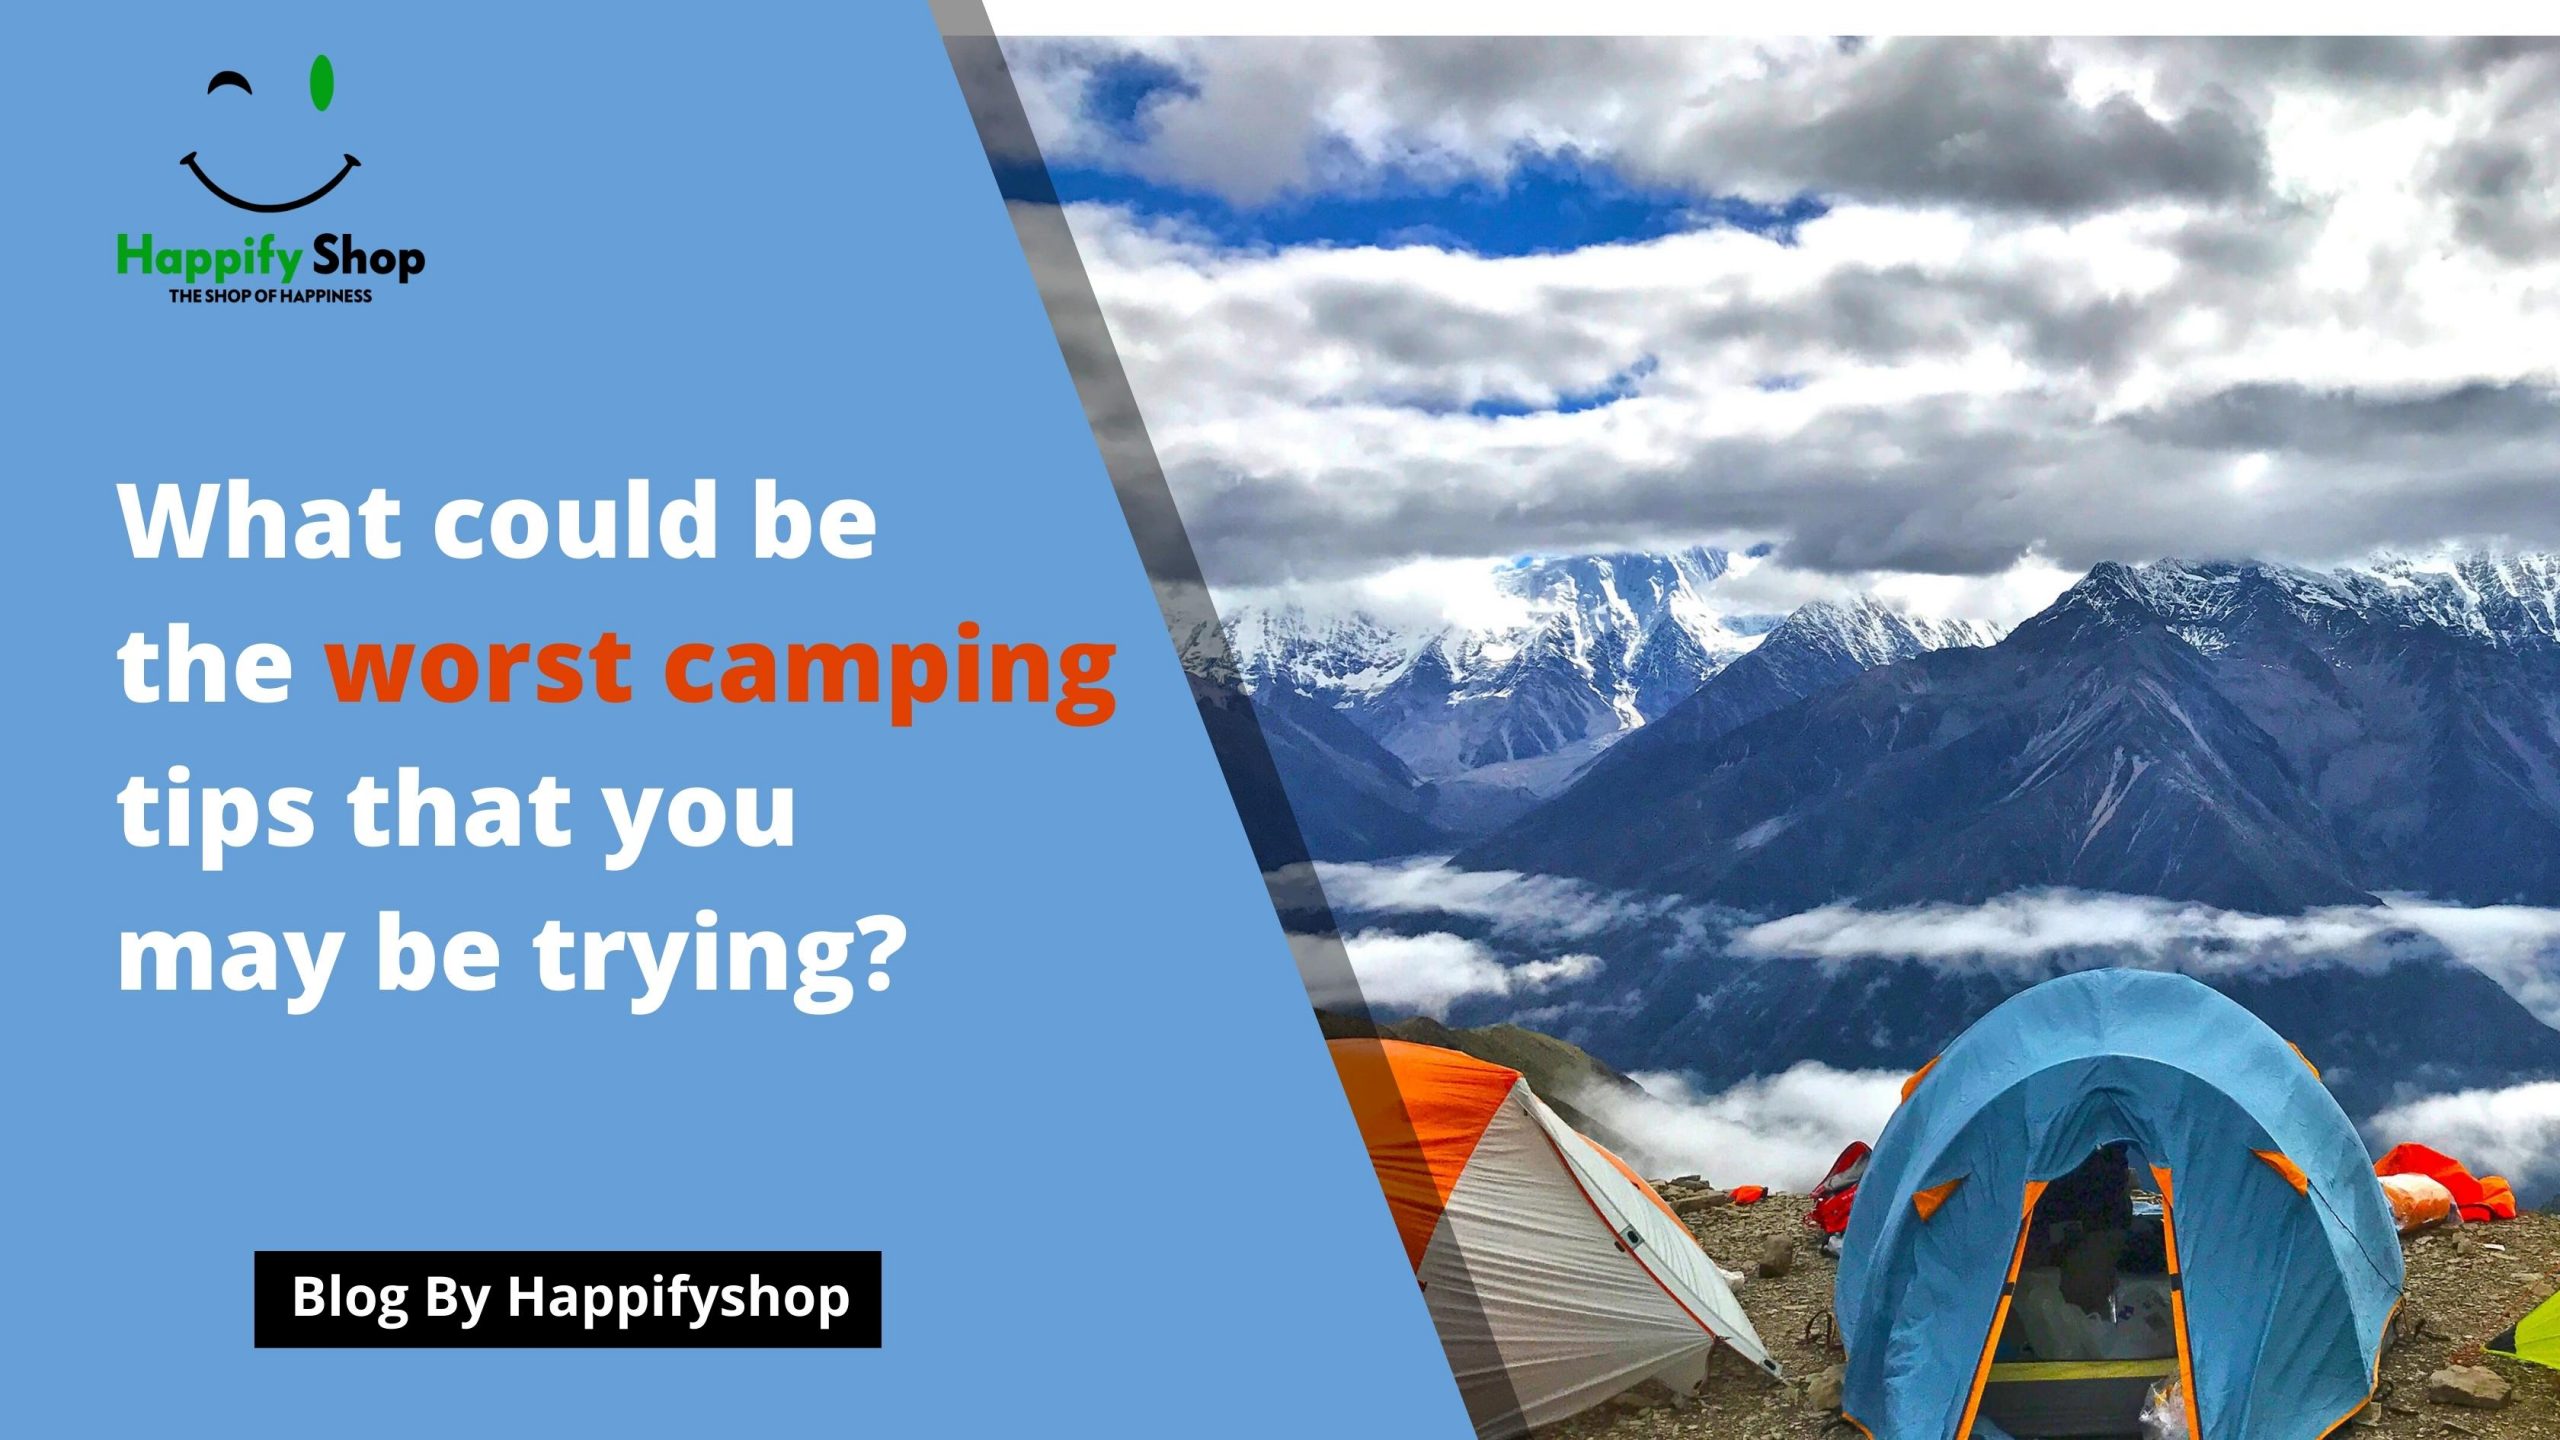 What could be the worst camping tips that you may be trying scaled